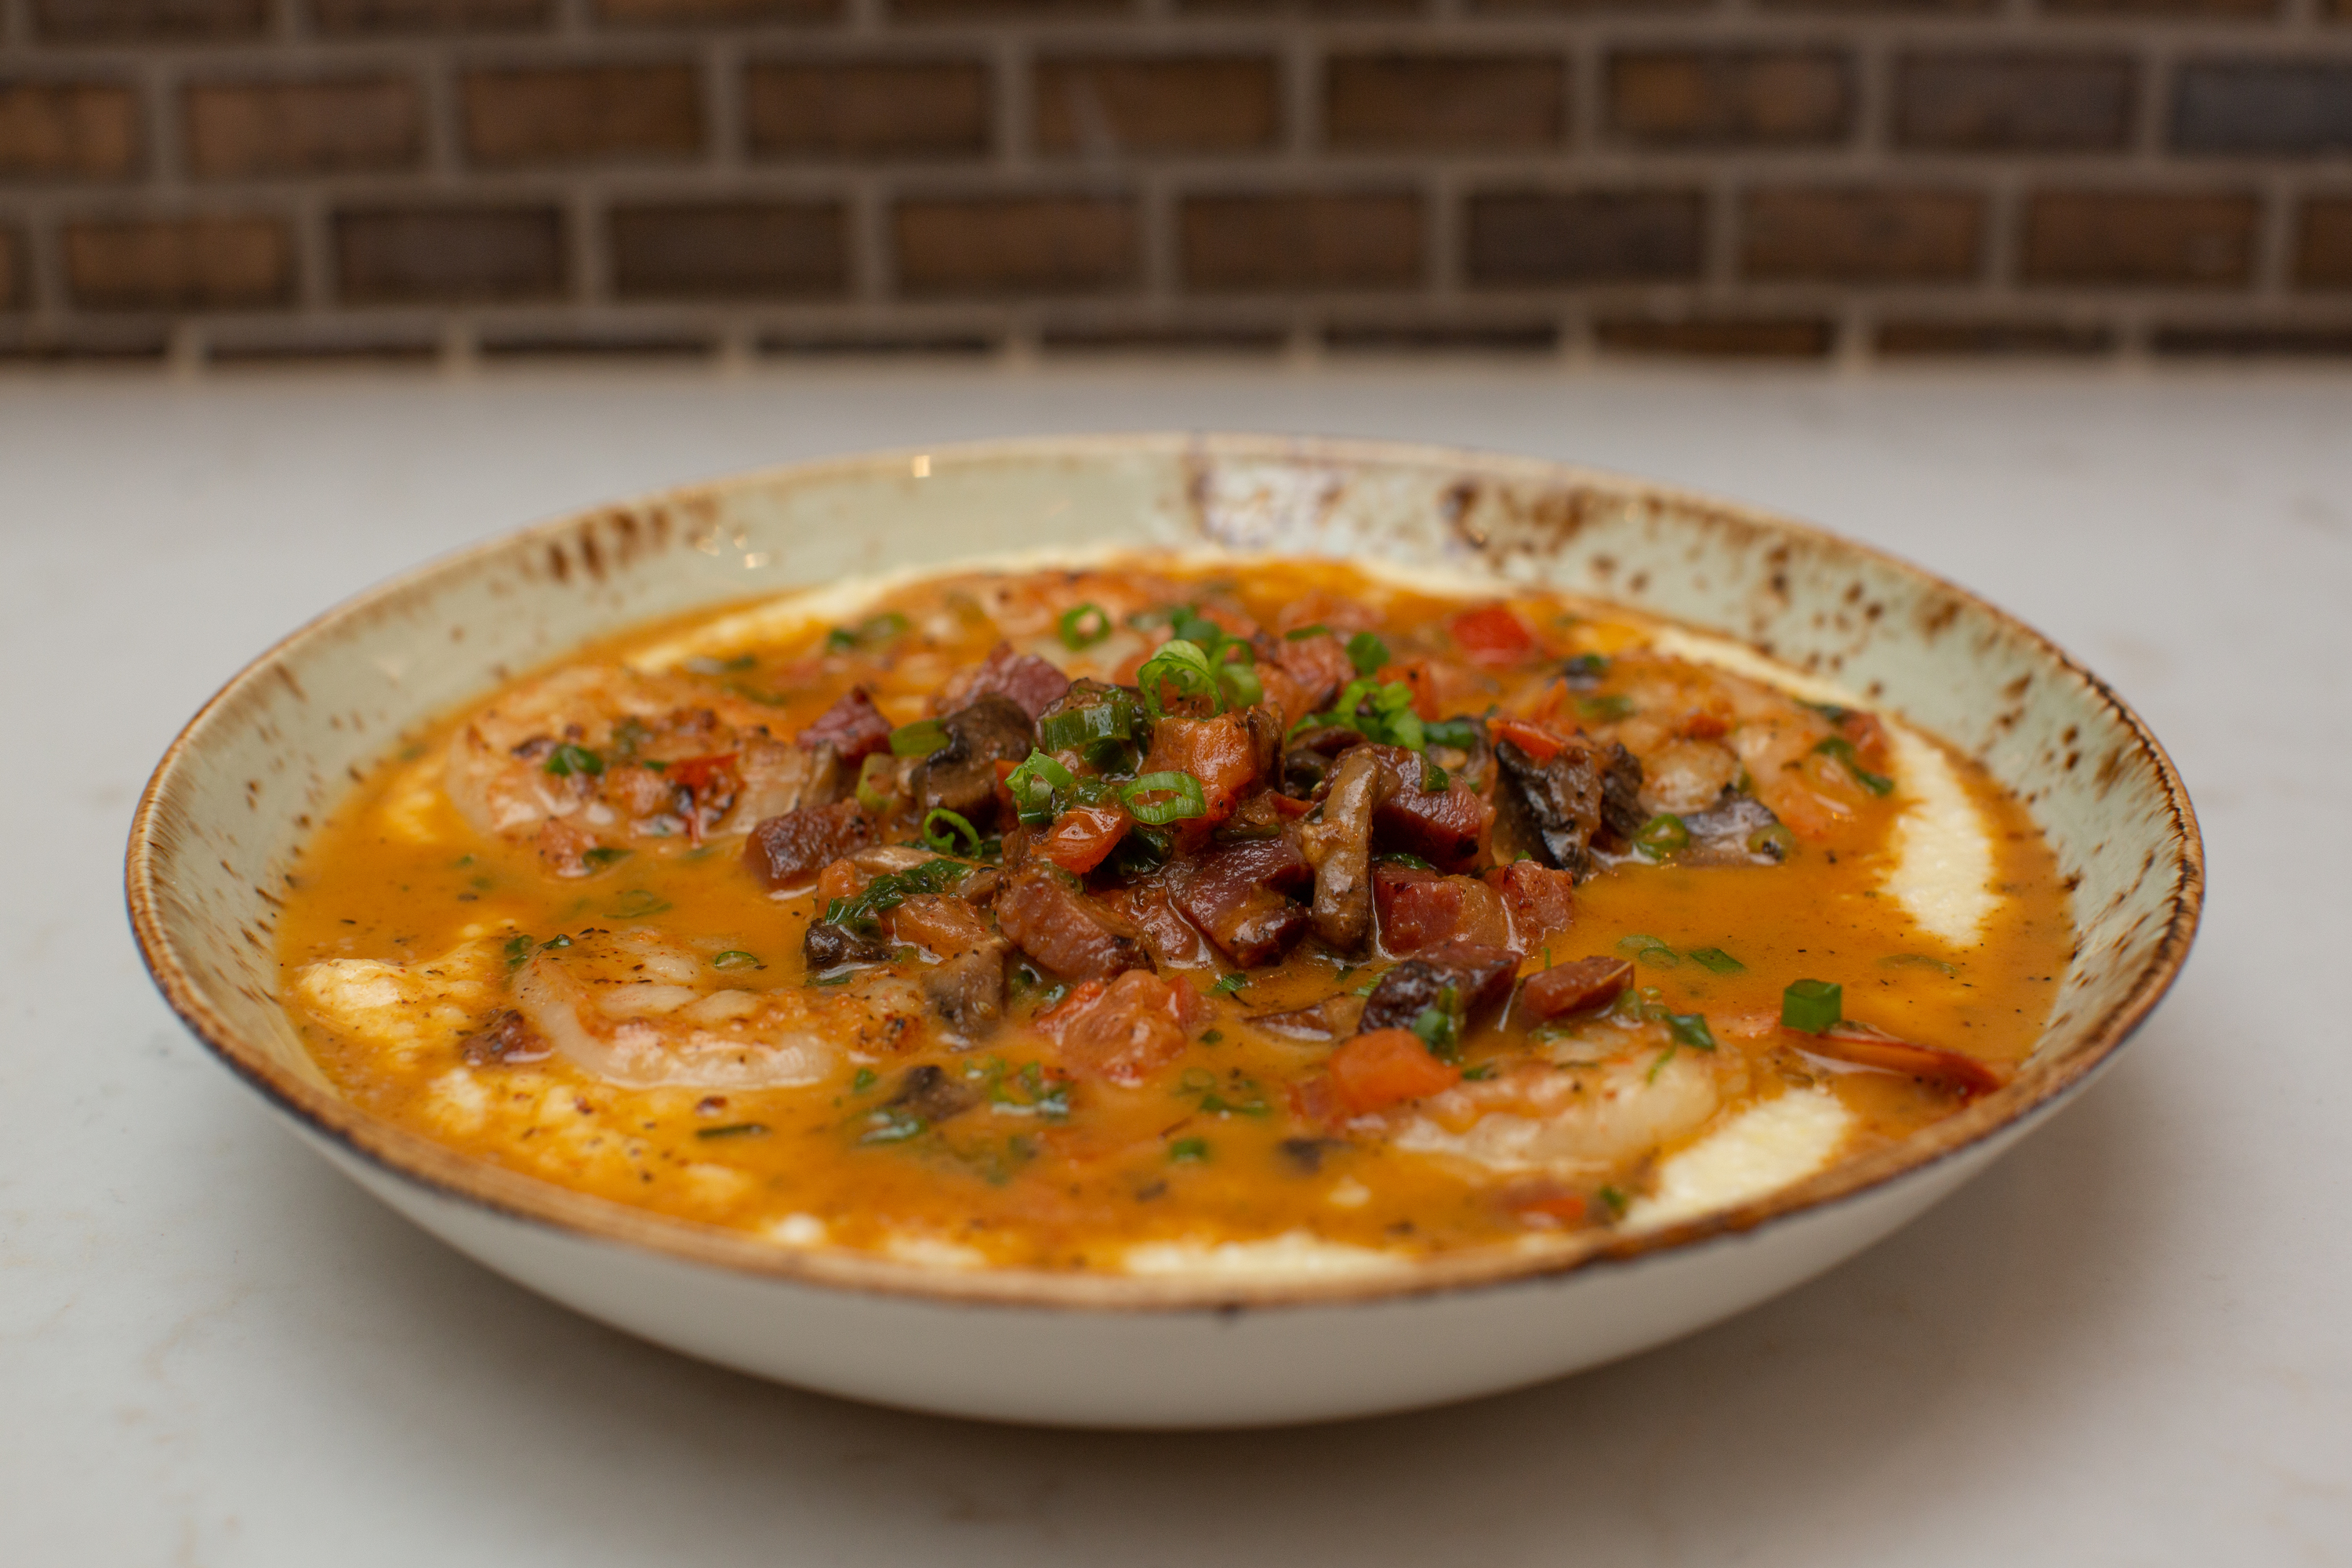 A bowl of creamy white grits dotted with large shrimp in a red-brown sauce and topped with pieces of sausage, tomato, and green onion.